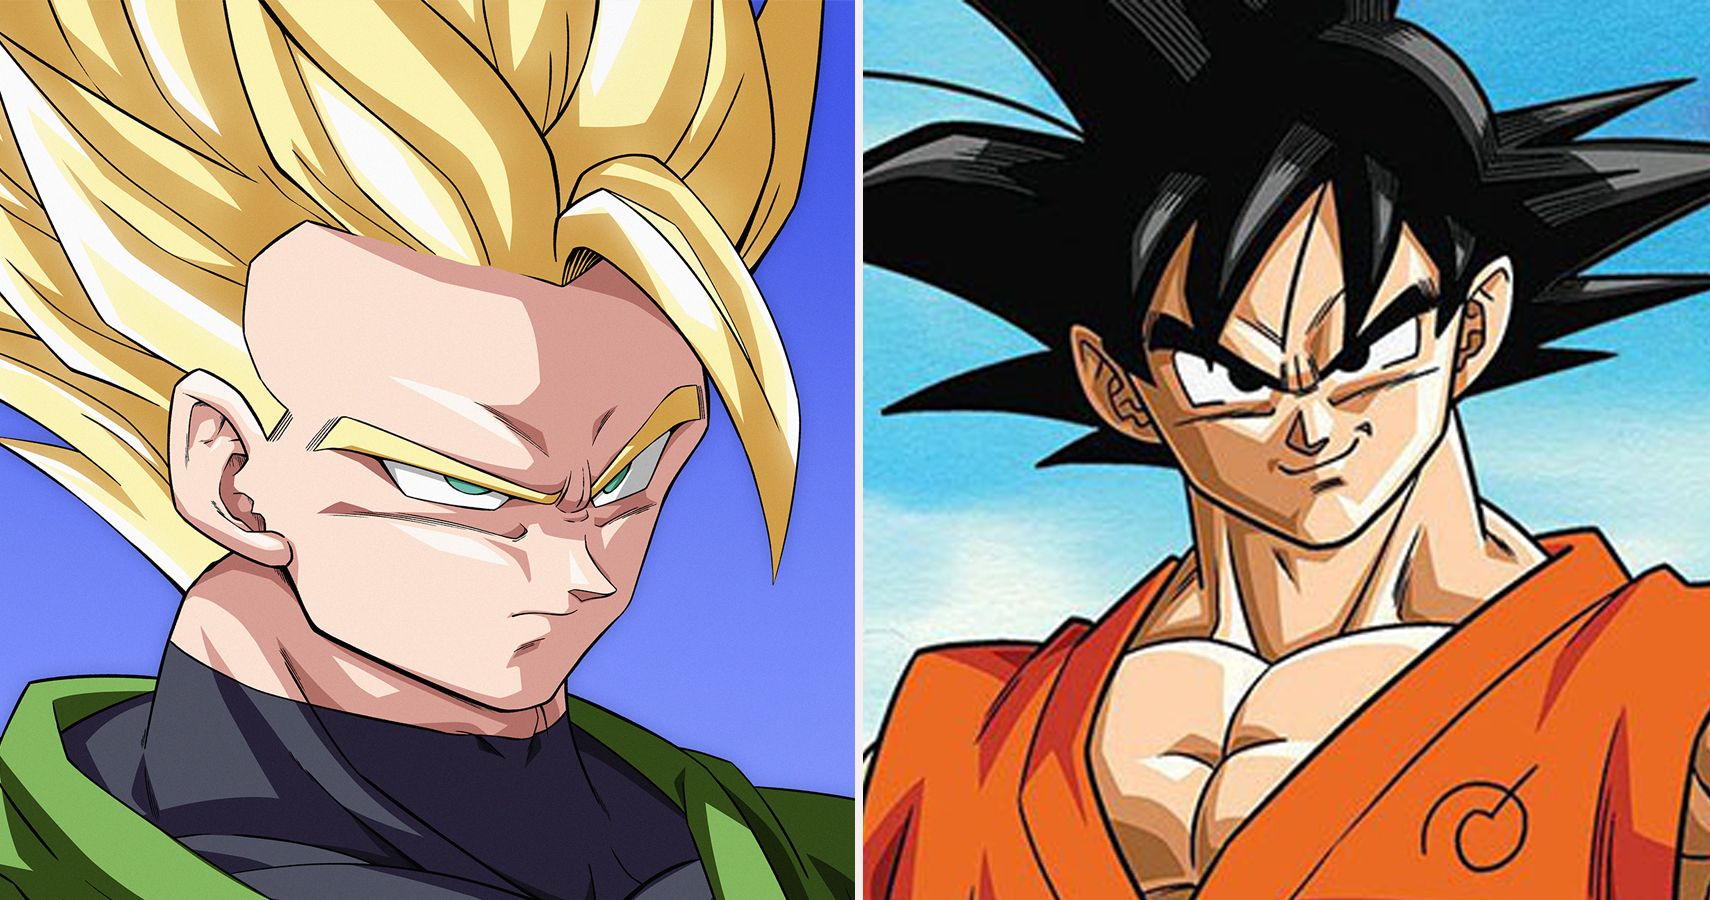 There's one other Dragon Ball Z character who holds an. 